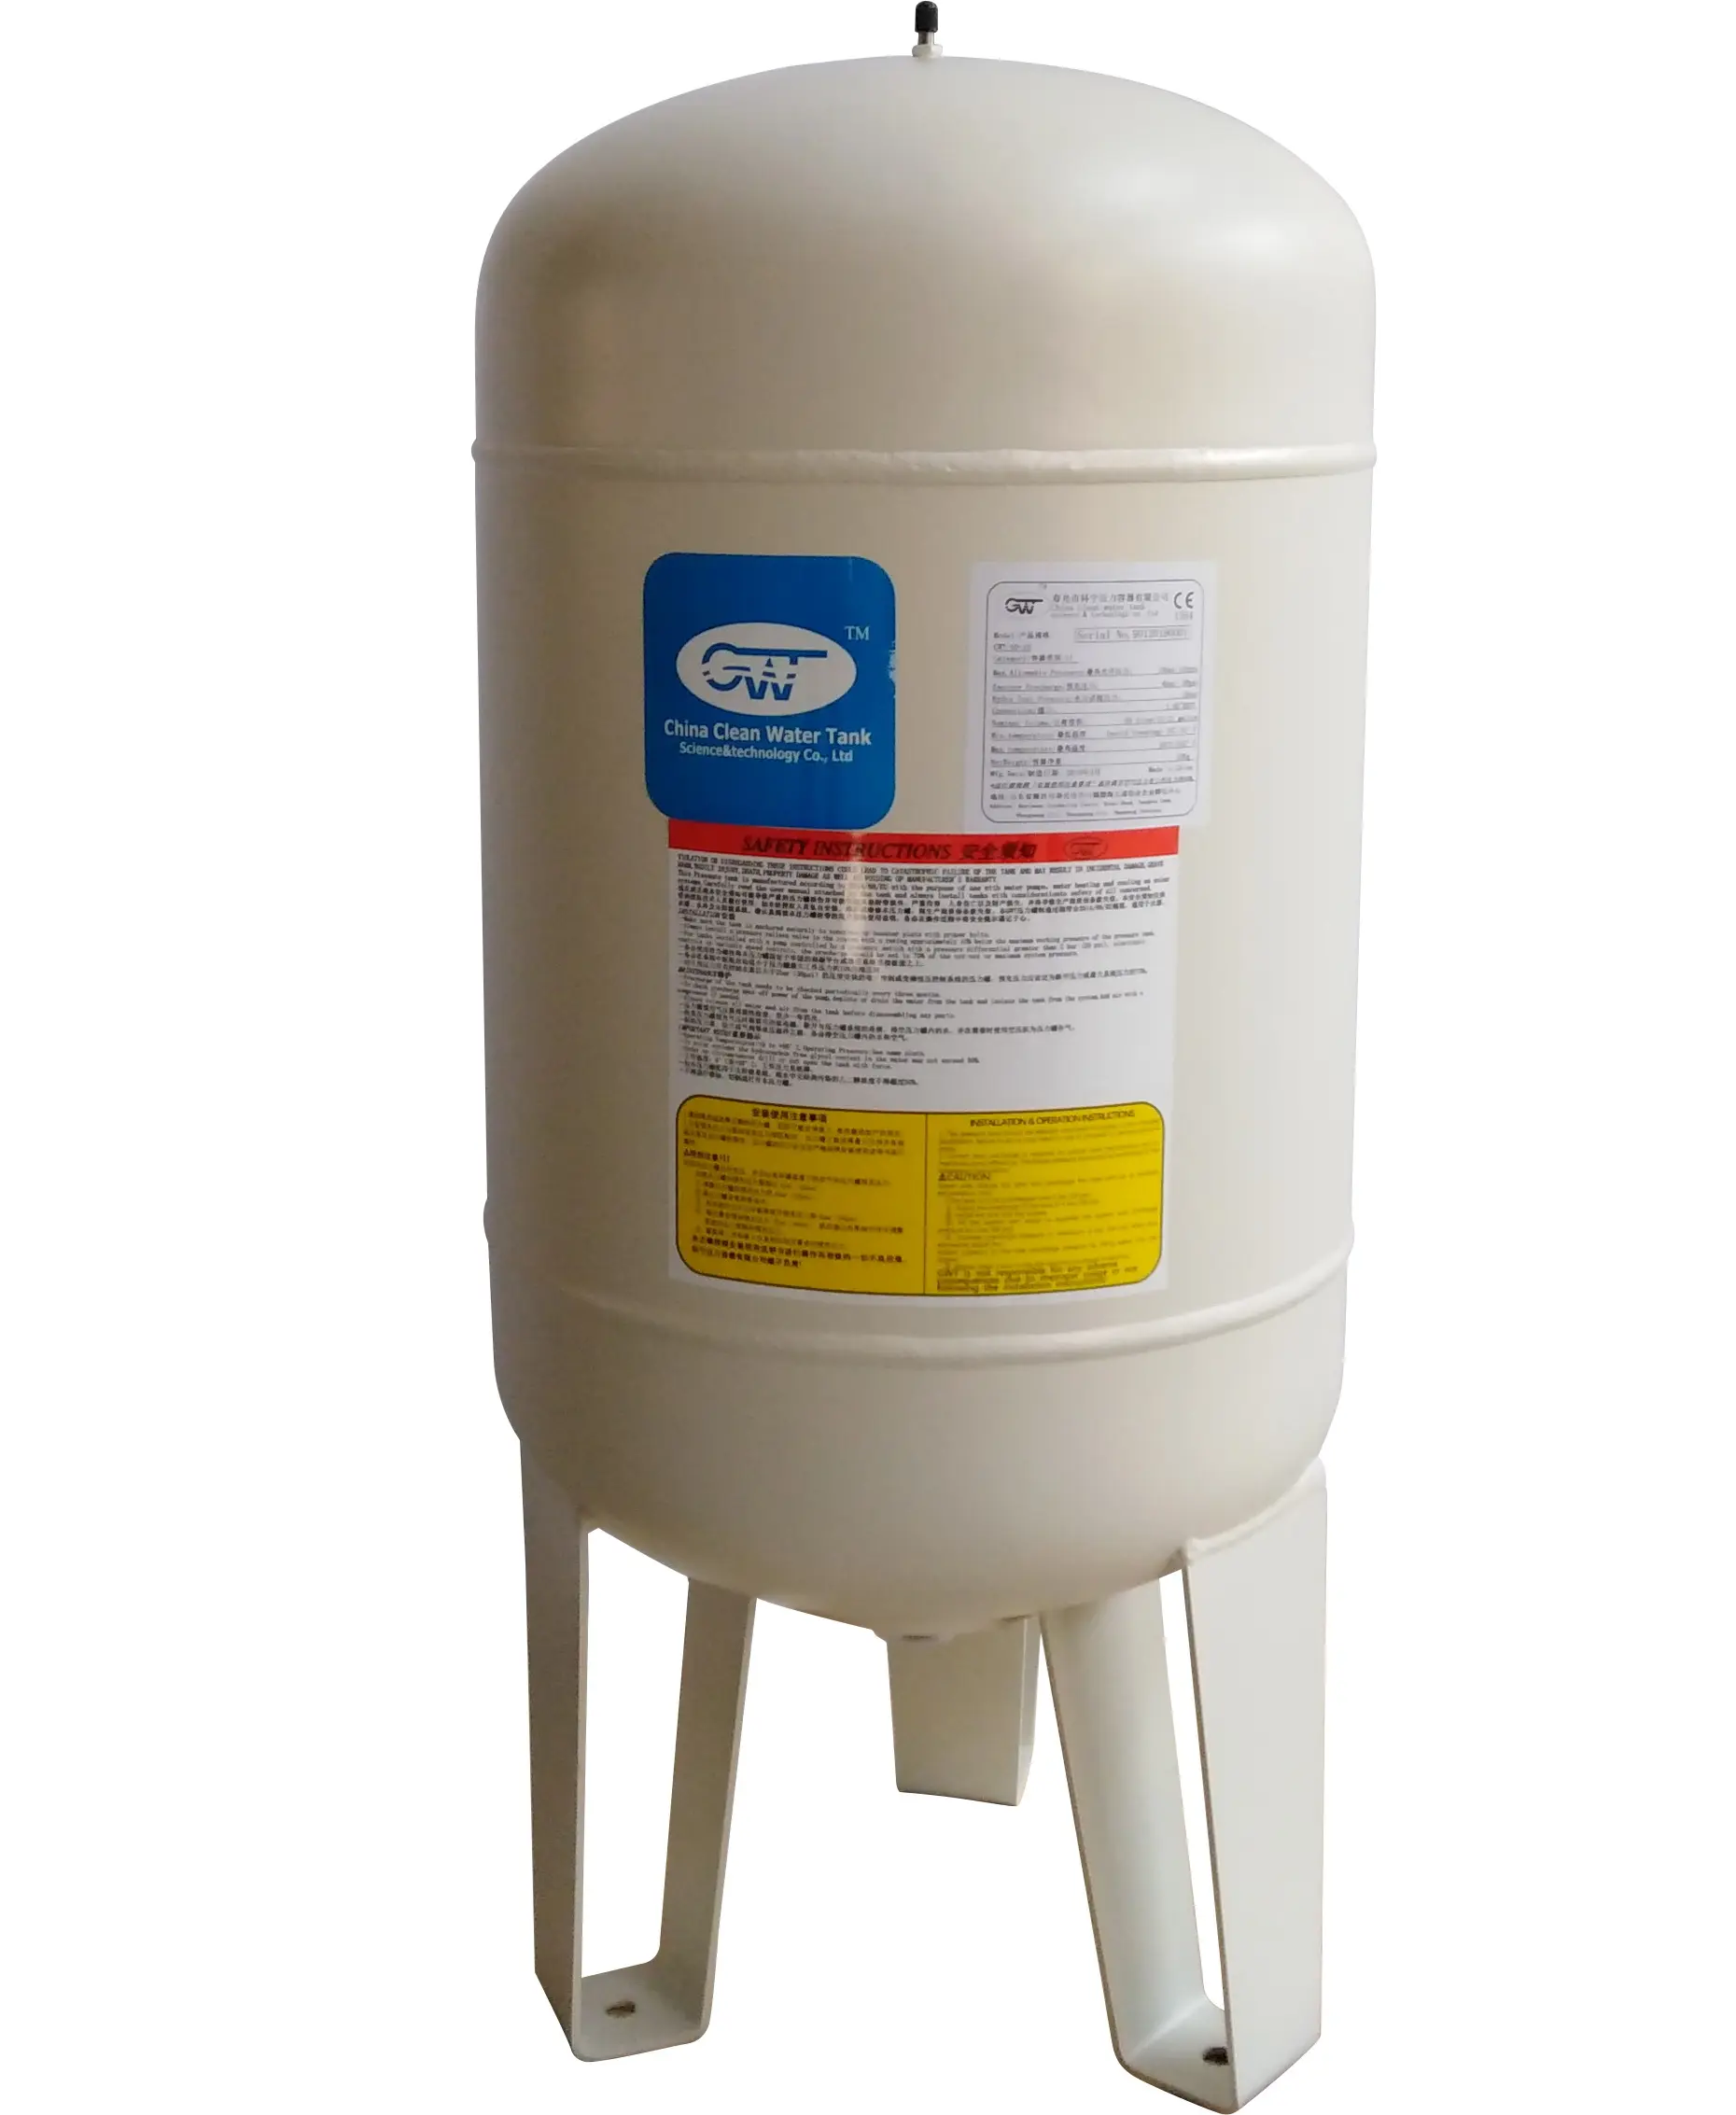 Highly cost effective water pressure tank 500 liters expansion vessel